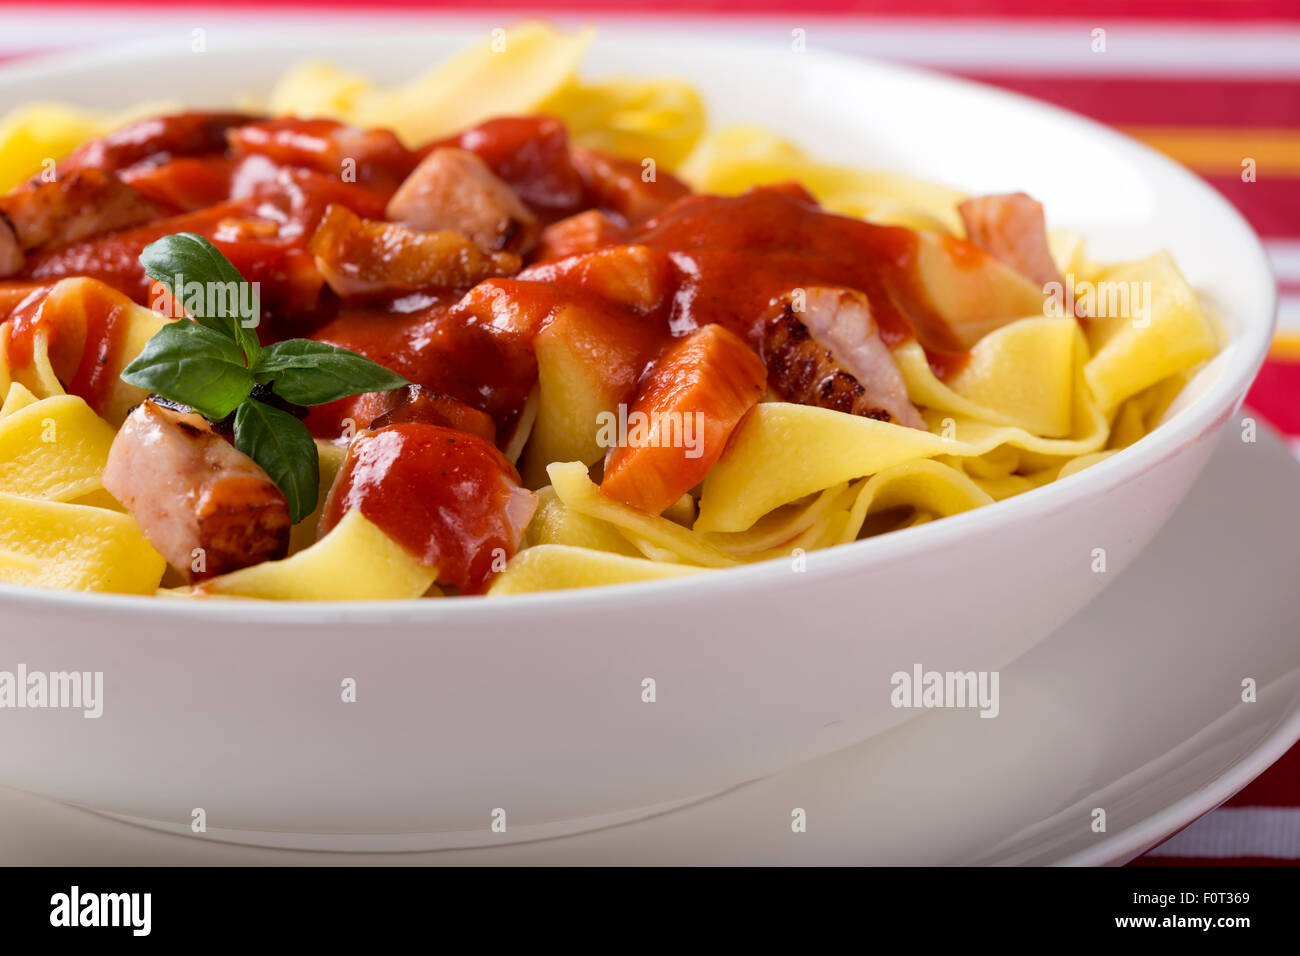 Egg tagliatelle with meat in tomato sauce Stock Photo